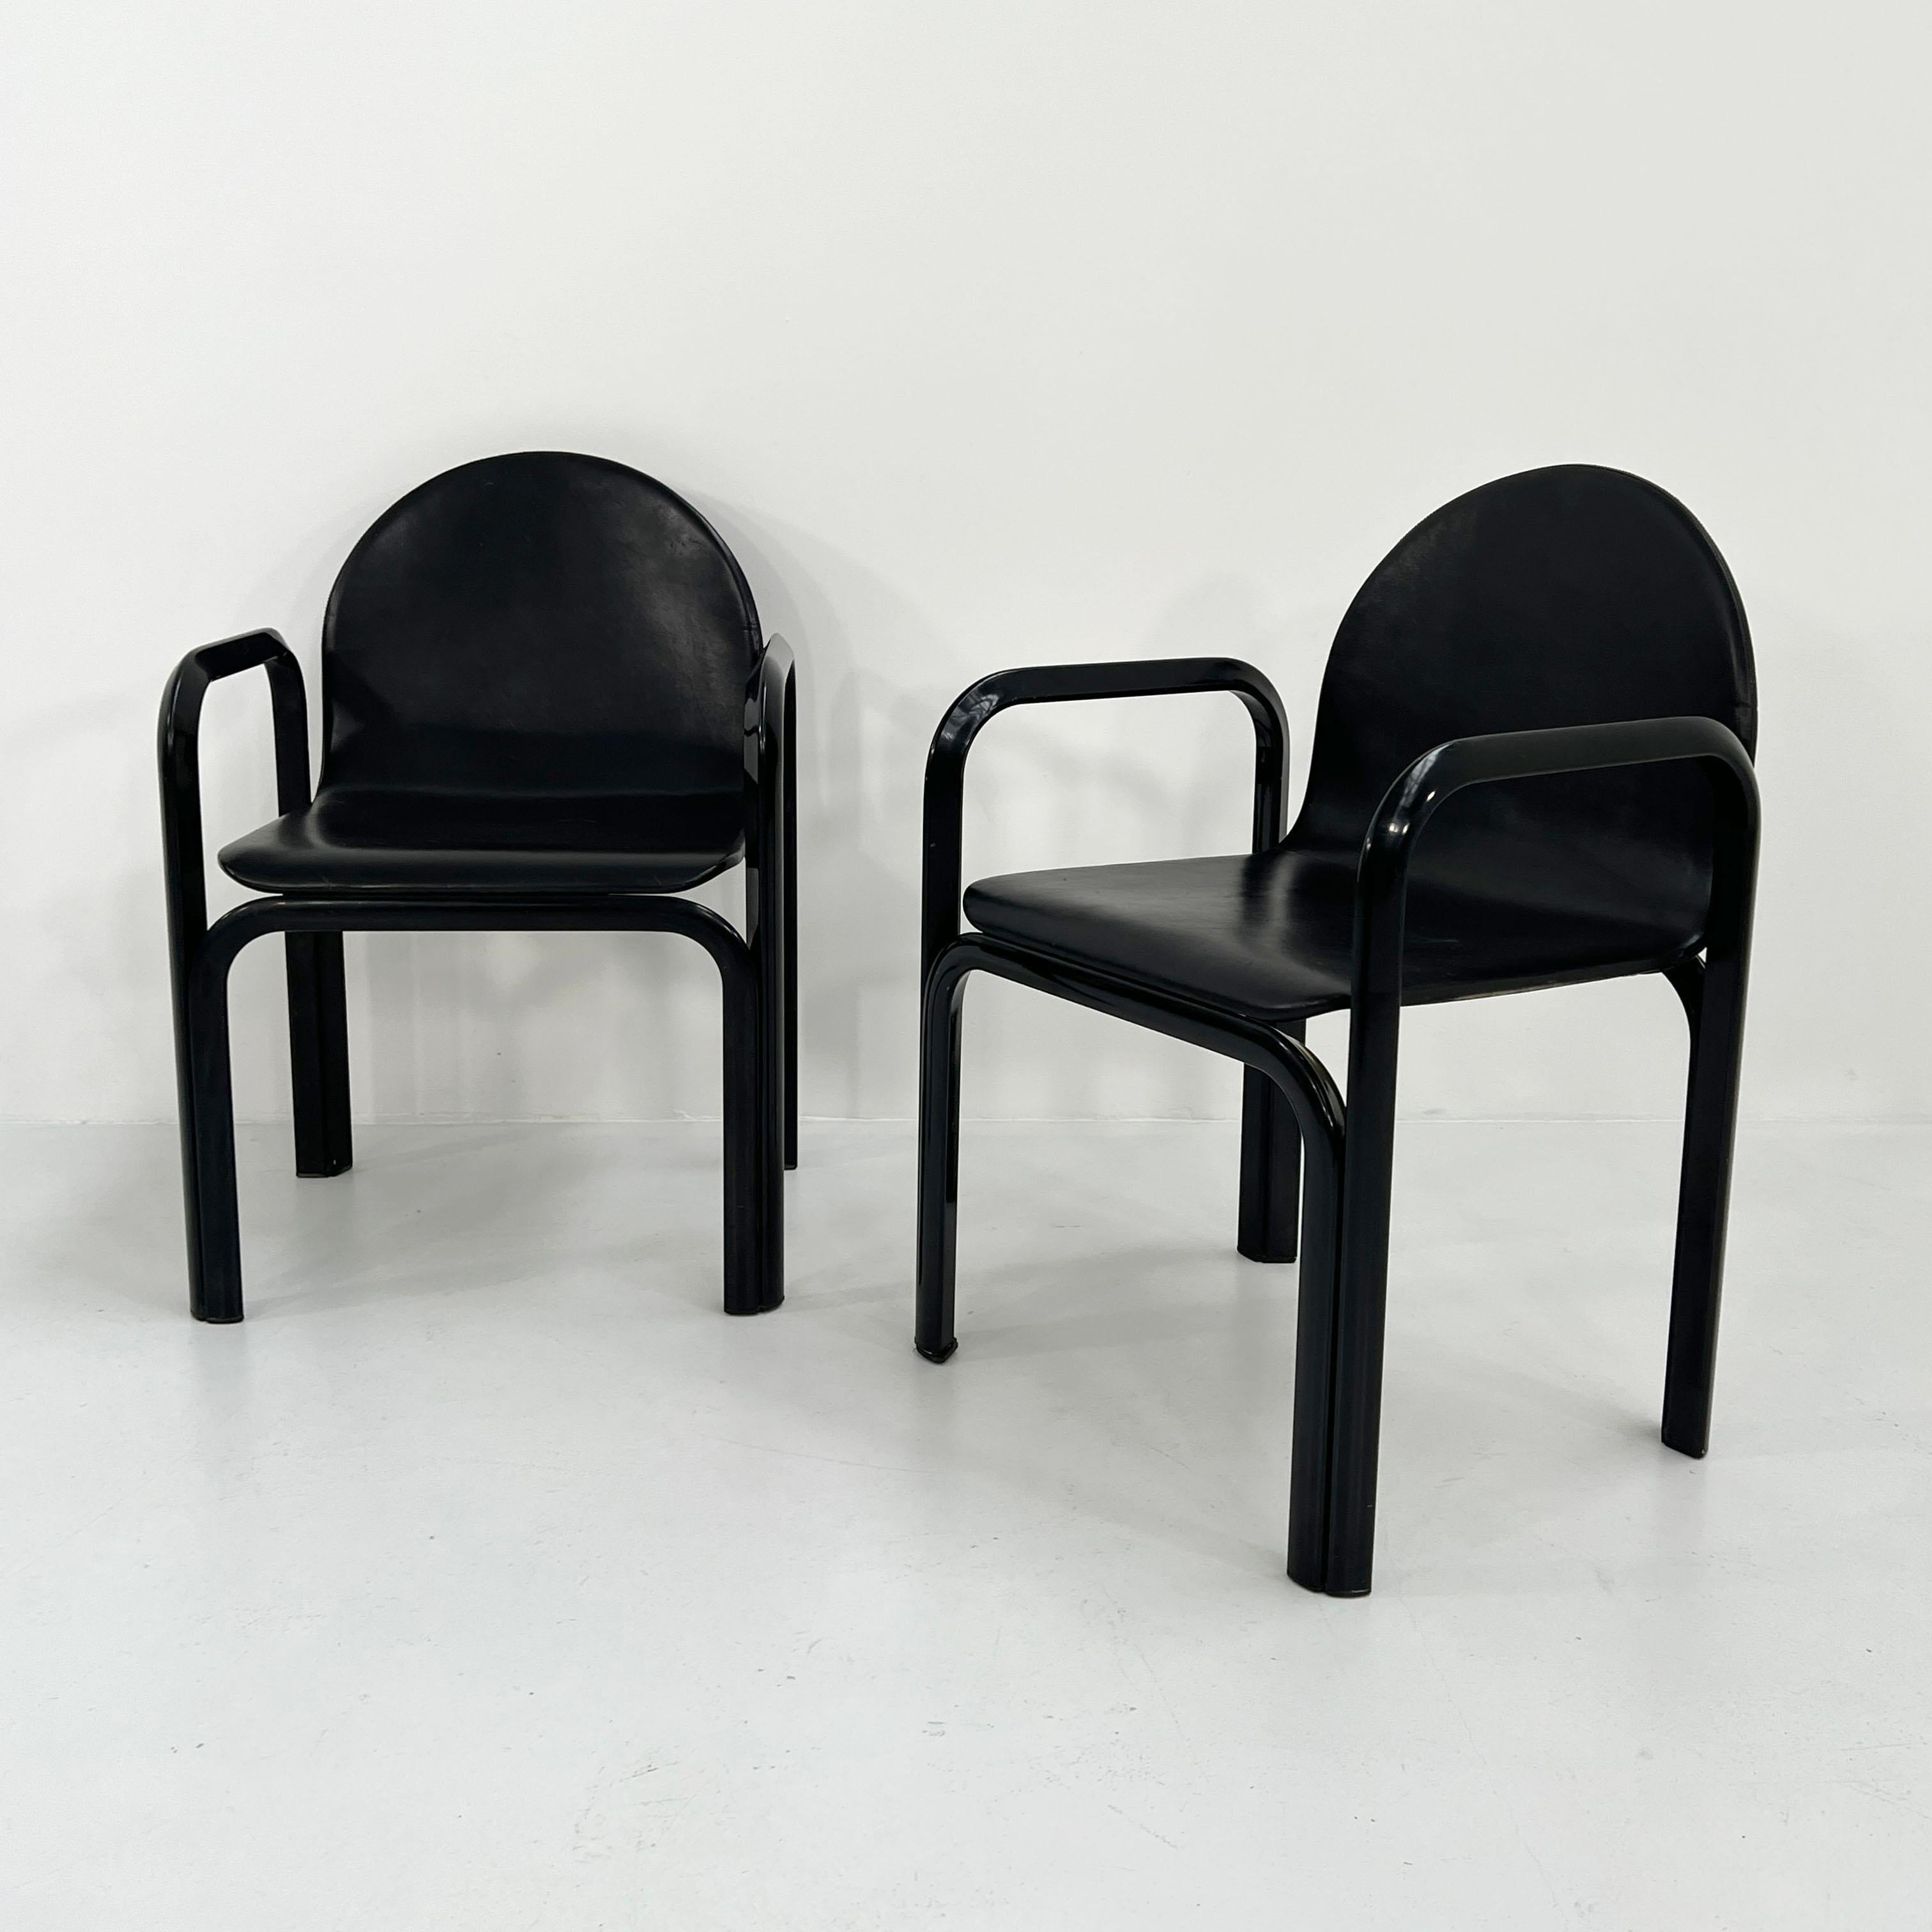 Late 20th Century Set of 4 Orsay Dining Chairs by Gae Aulenti for Knoll International, 1970s